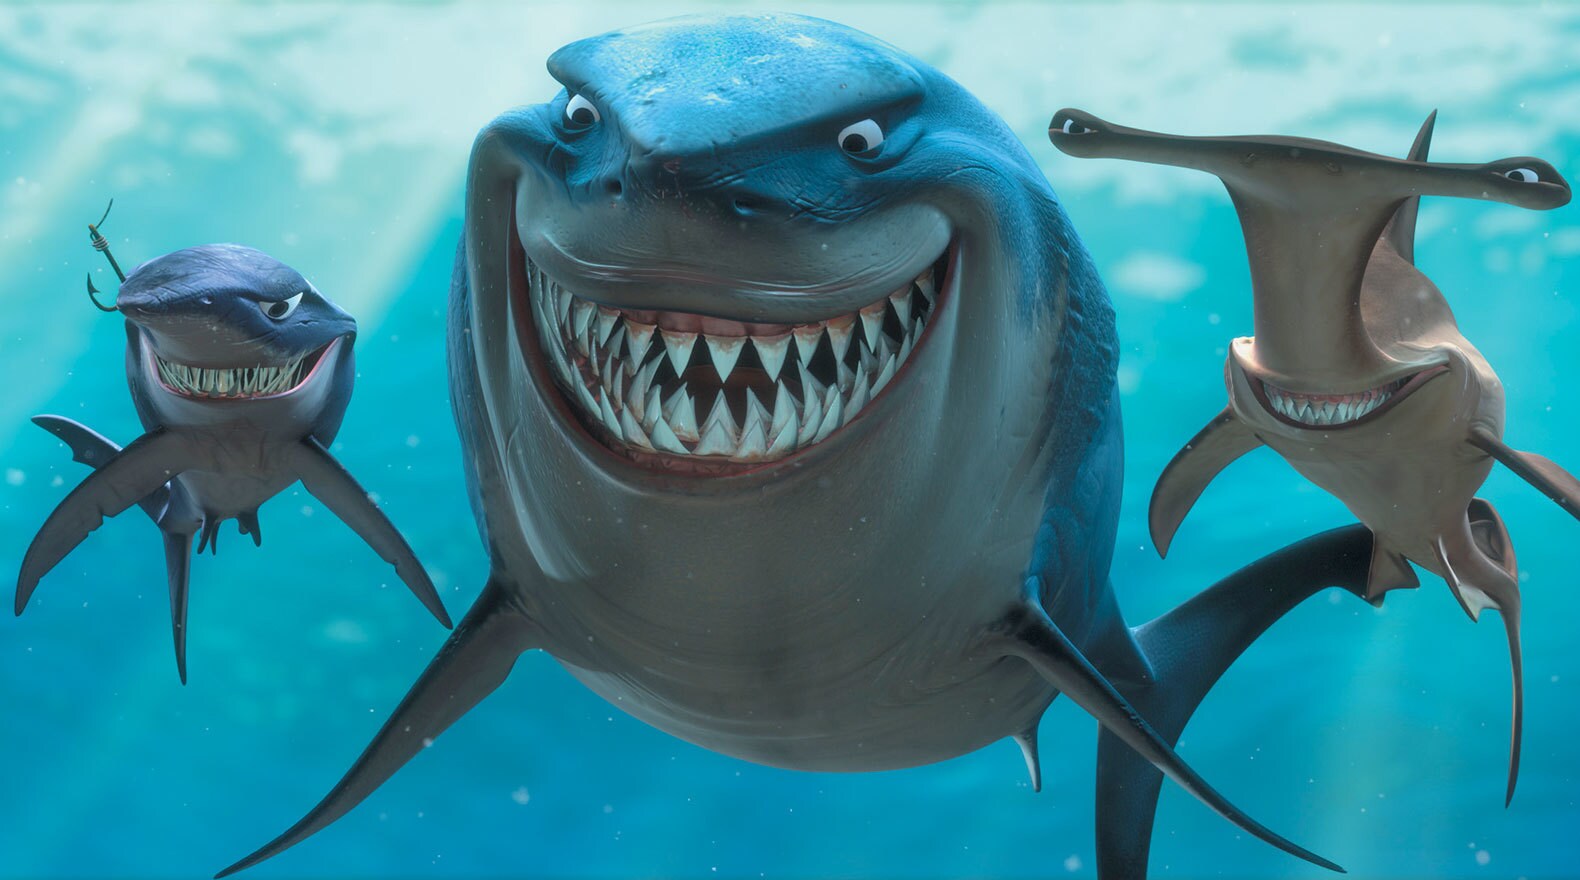 Shark characters Bruce, Anchor, and Chum in a line smiling in "Finding Nemo"